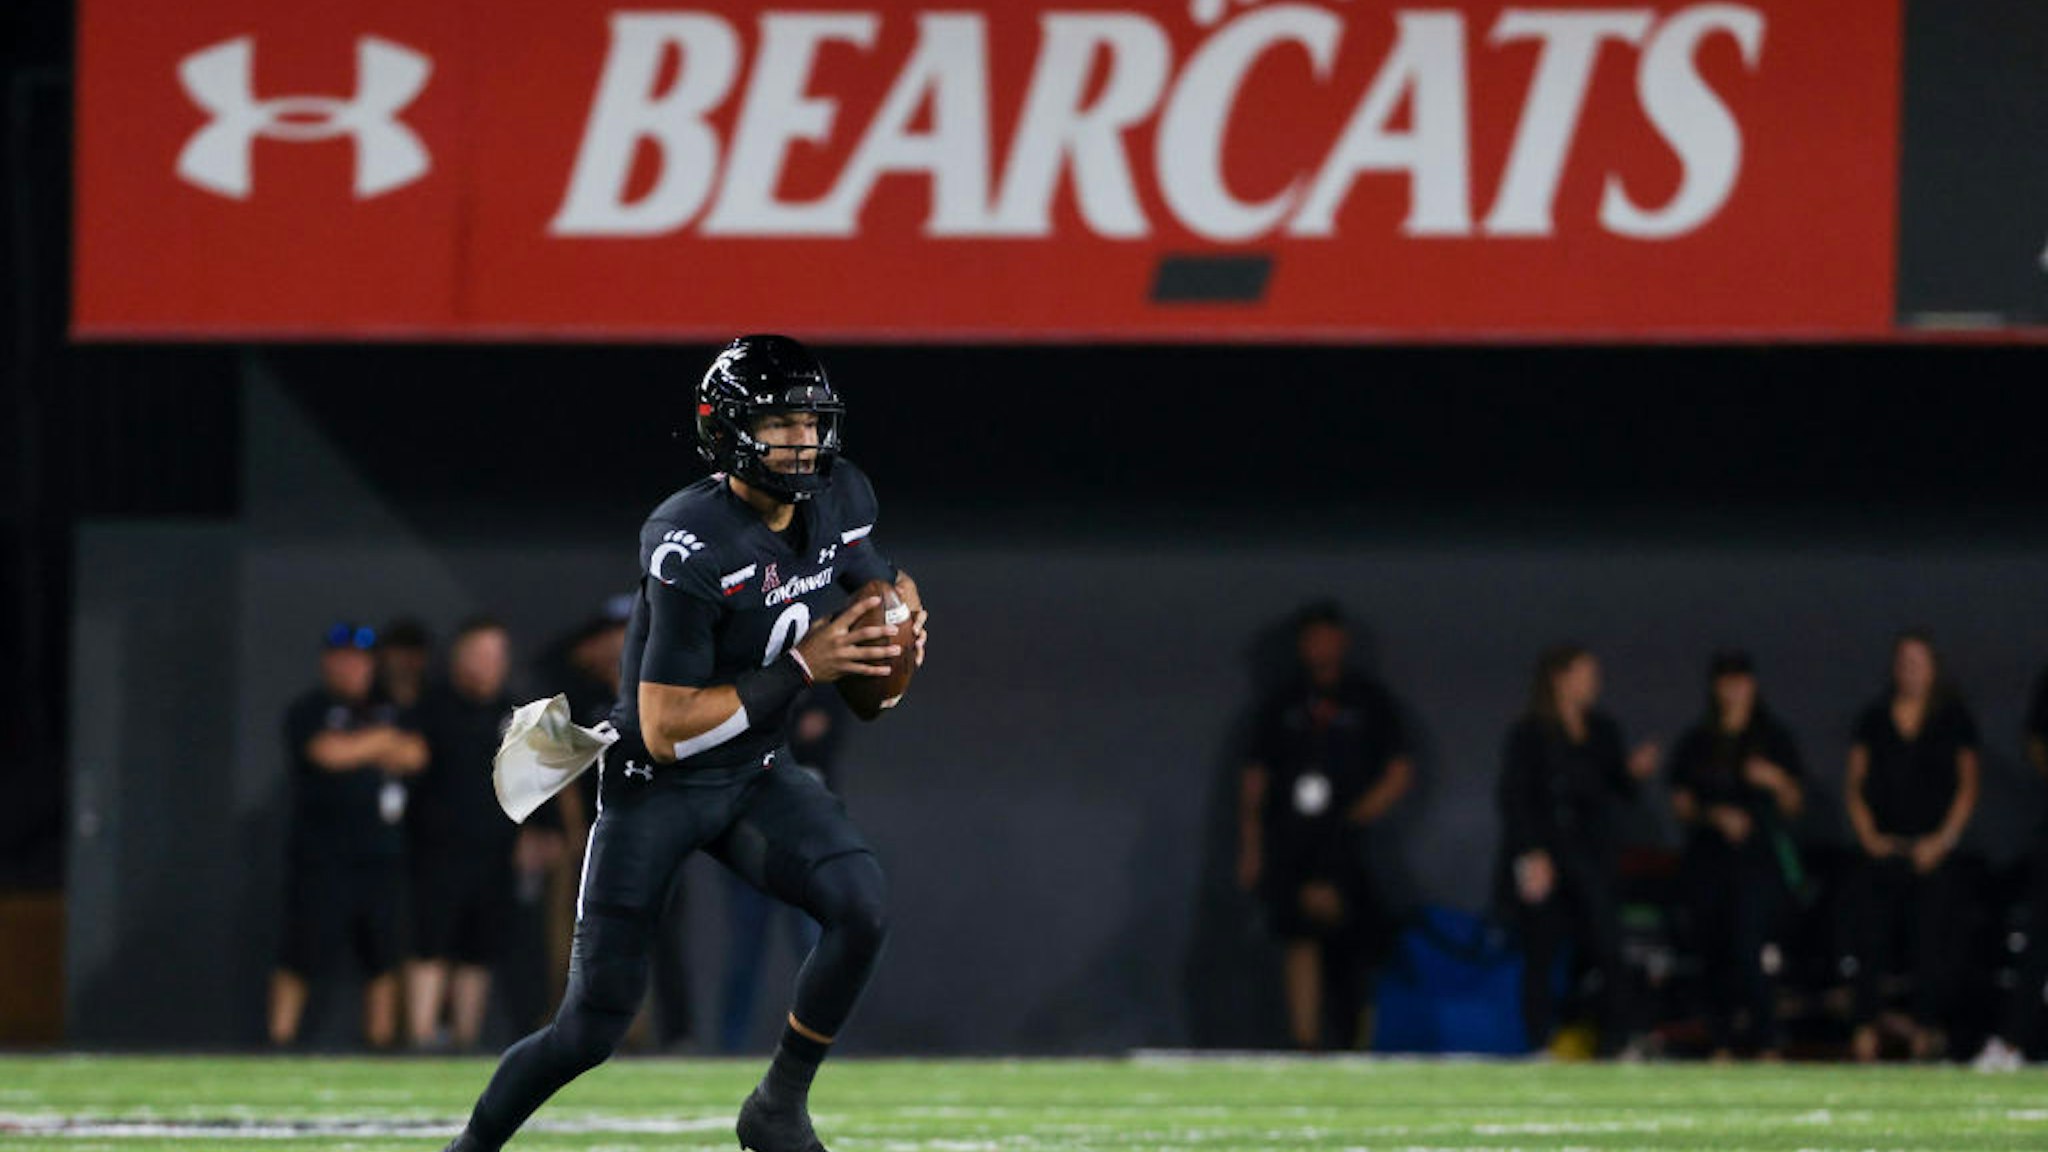 CINCINNATI, OHIO - OCTOBER 08: Desmond Ridder #9 of the Cincinnati Bearcats runs with the ball in the second quarter against the Temple Owls at Nippert Stadium on October 08, 2021 in Cincinnati, Ohio. (Photo by Dylan Buell/Getty Images)